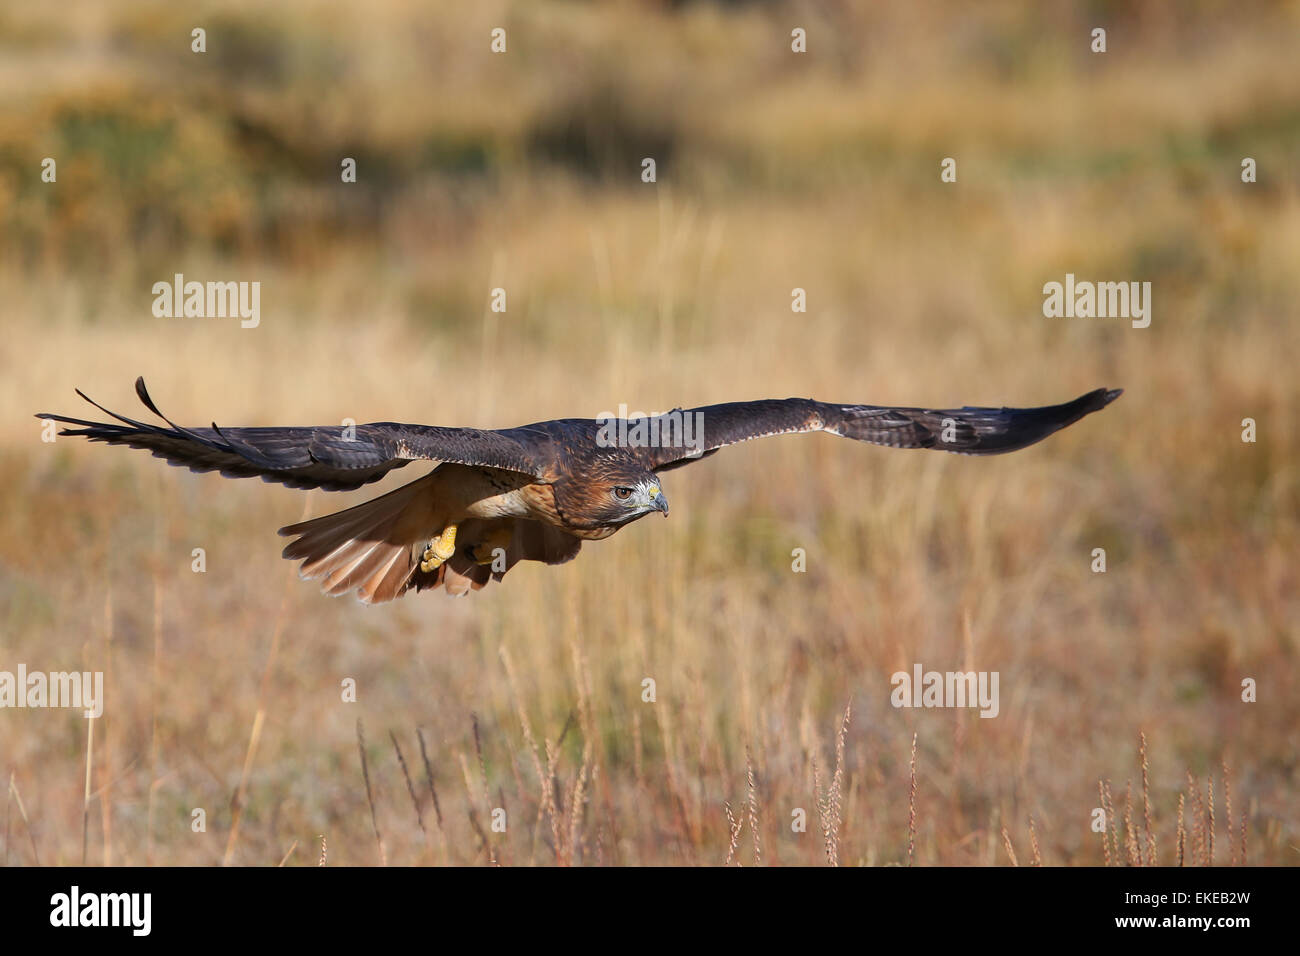 Red-tailed hawk (Buteo jamaicensis) in flight Stock Photo